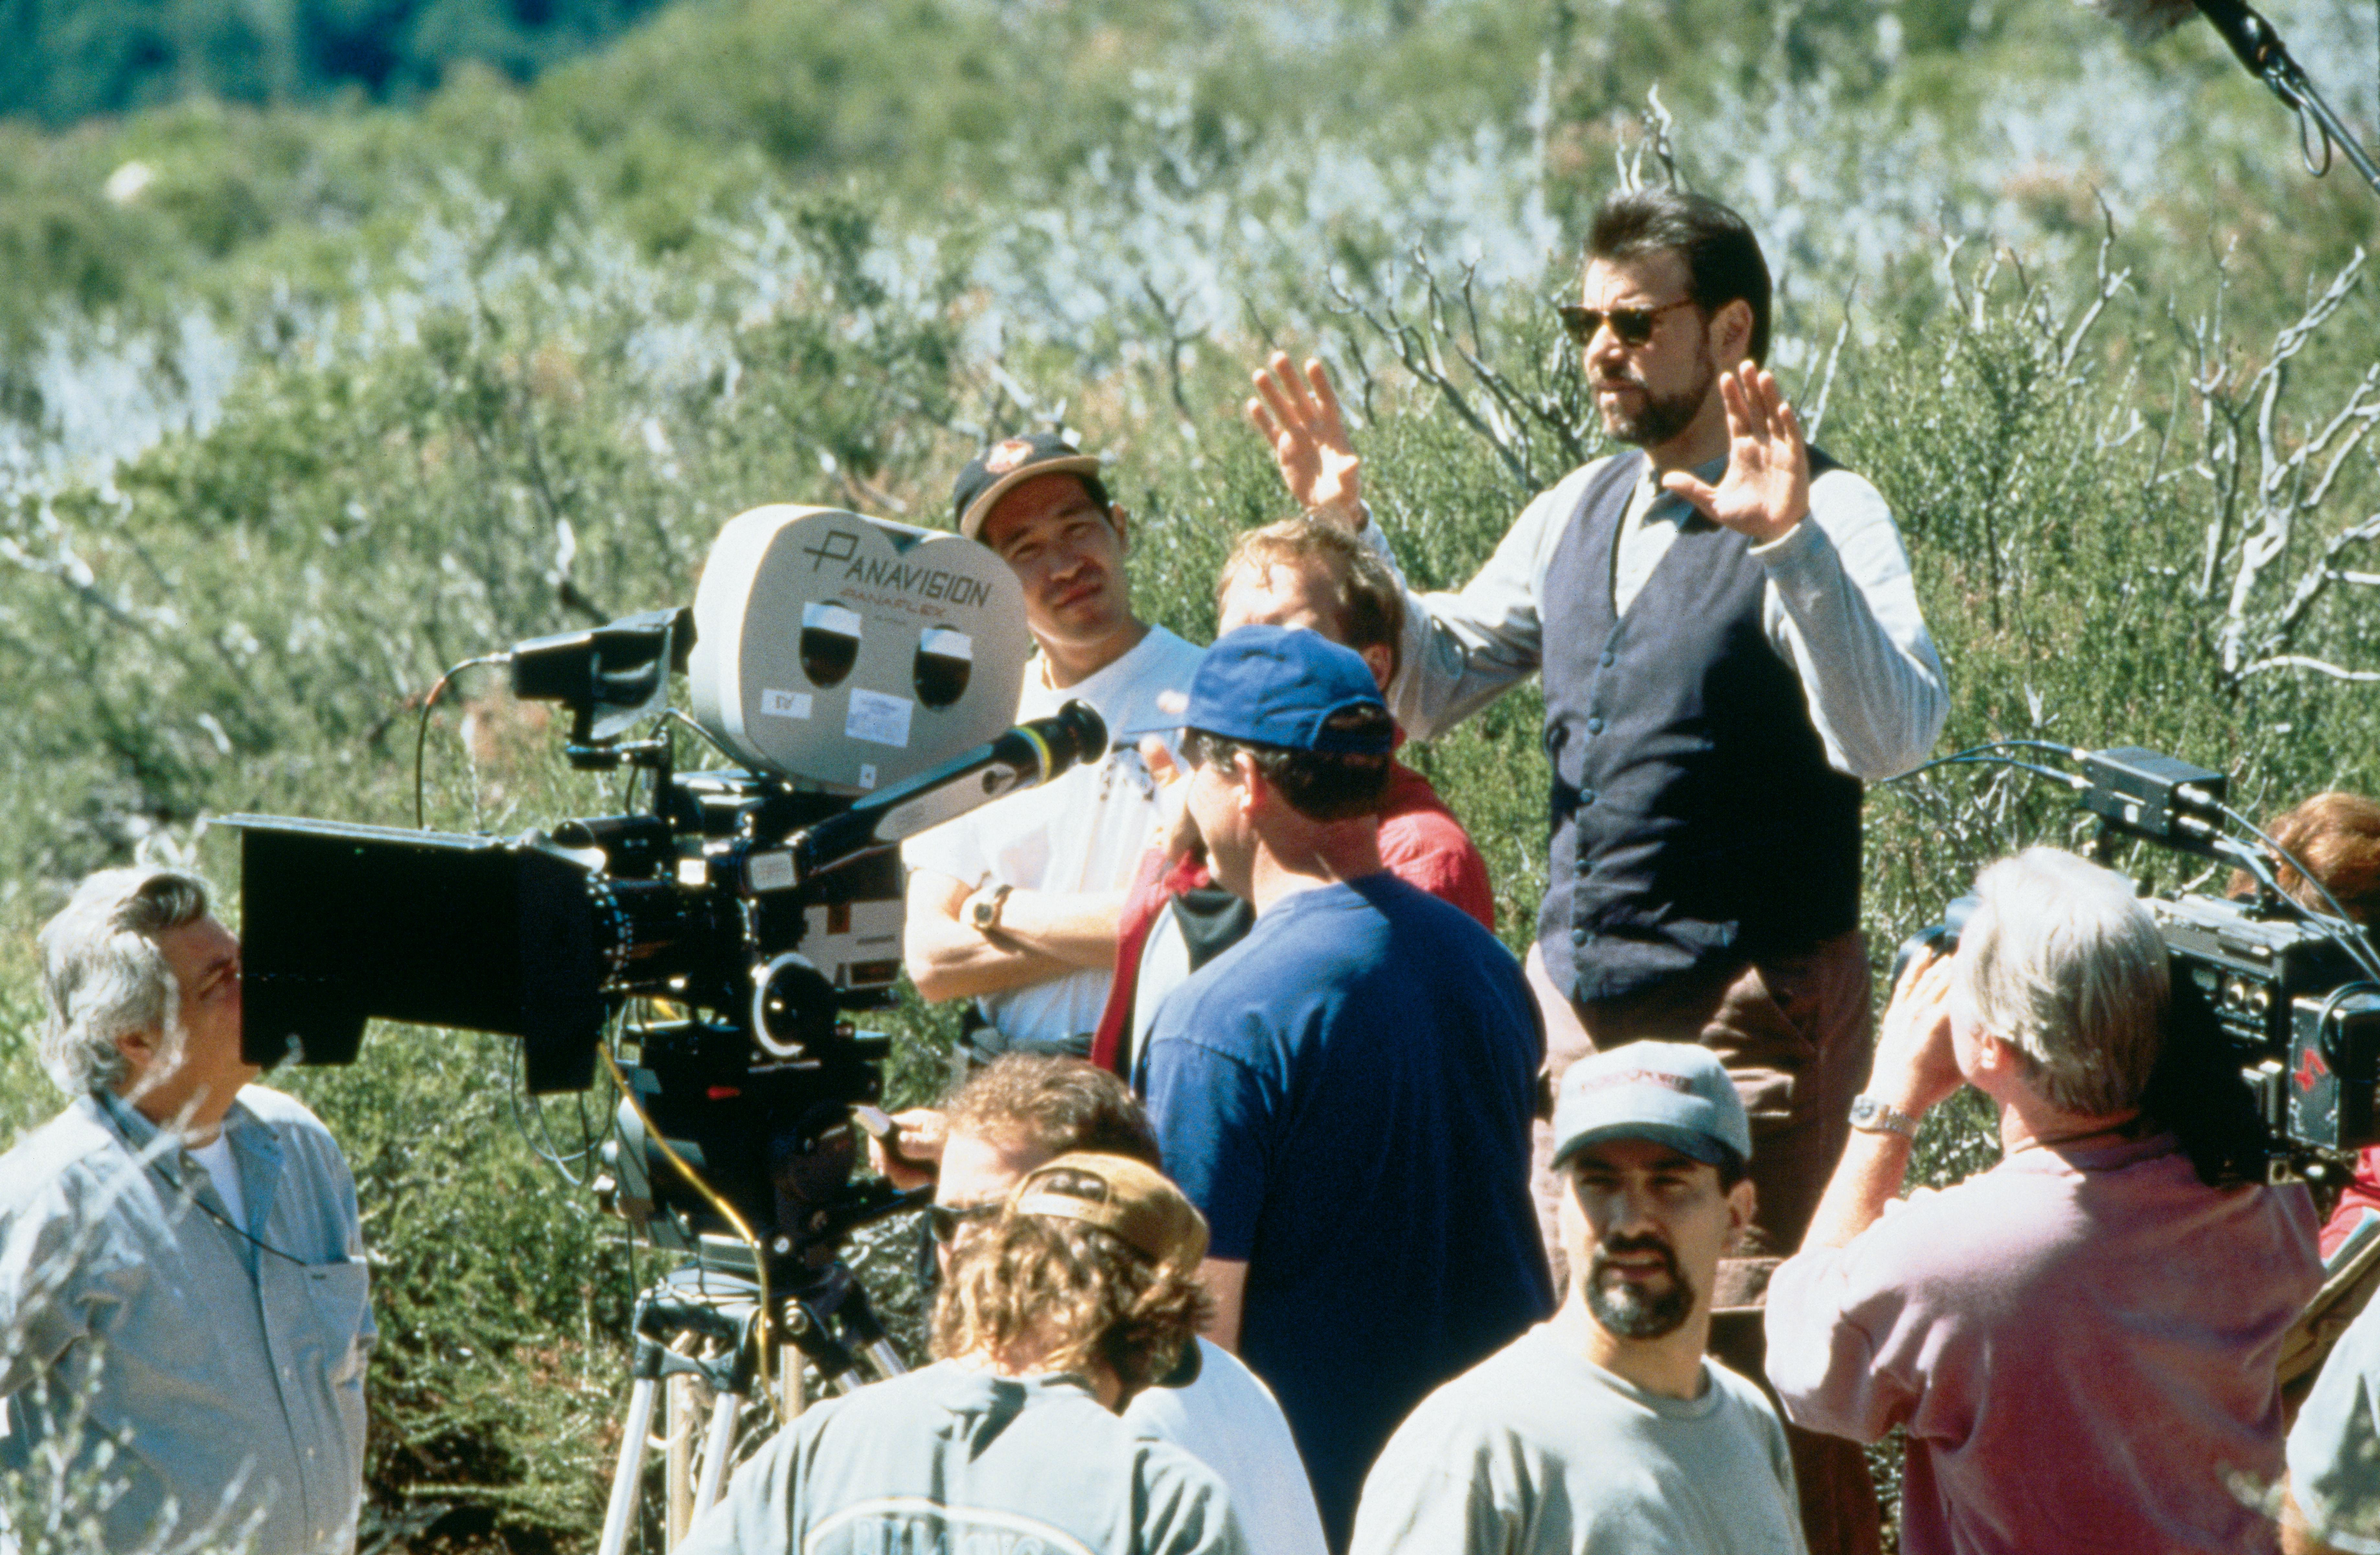 Jonathan Frakes directing a scene in First Contact, standing behind the camera, with crew around him.